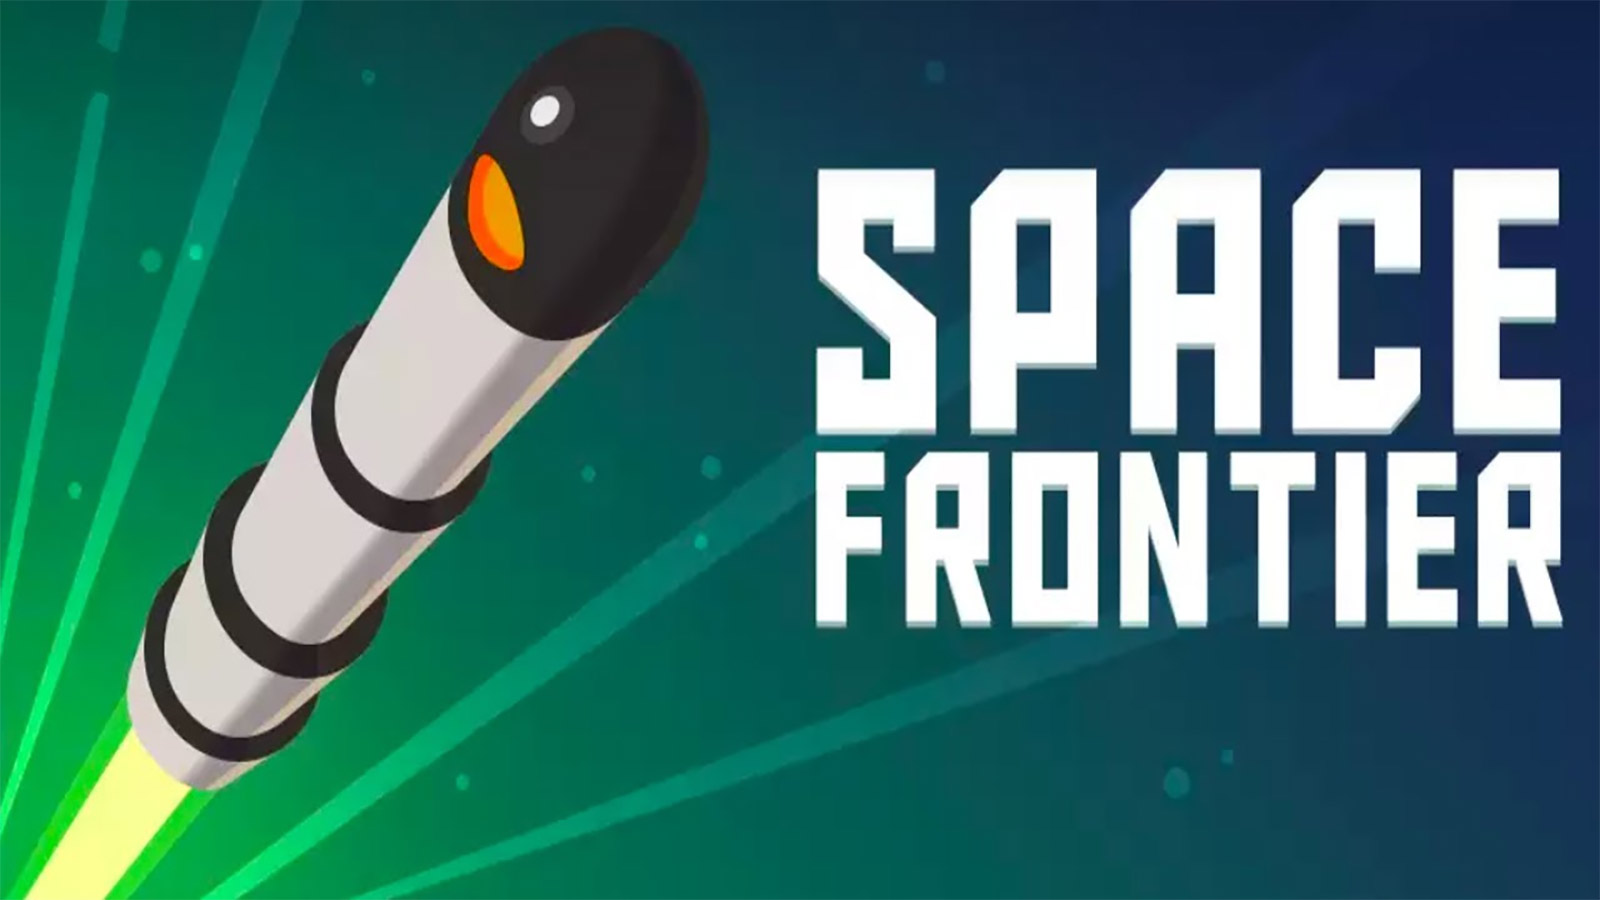 Space Frontier Mod Apk 1.2.3 (Unlimited Coins)